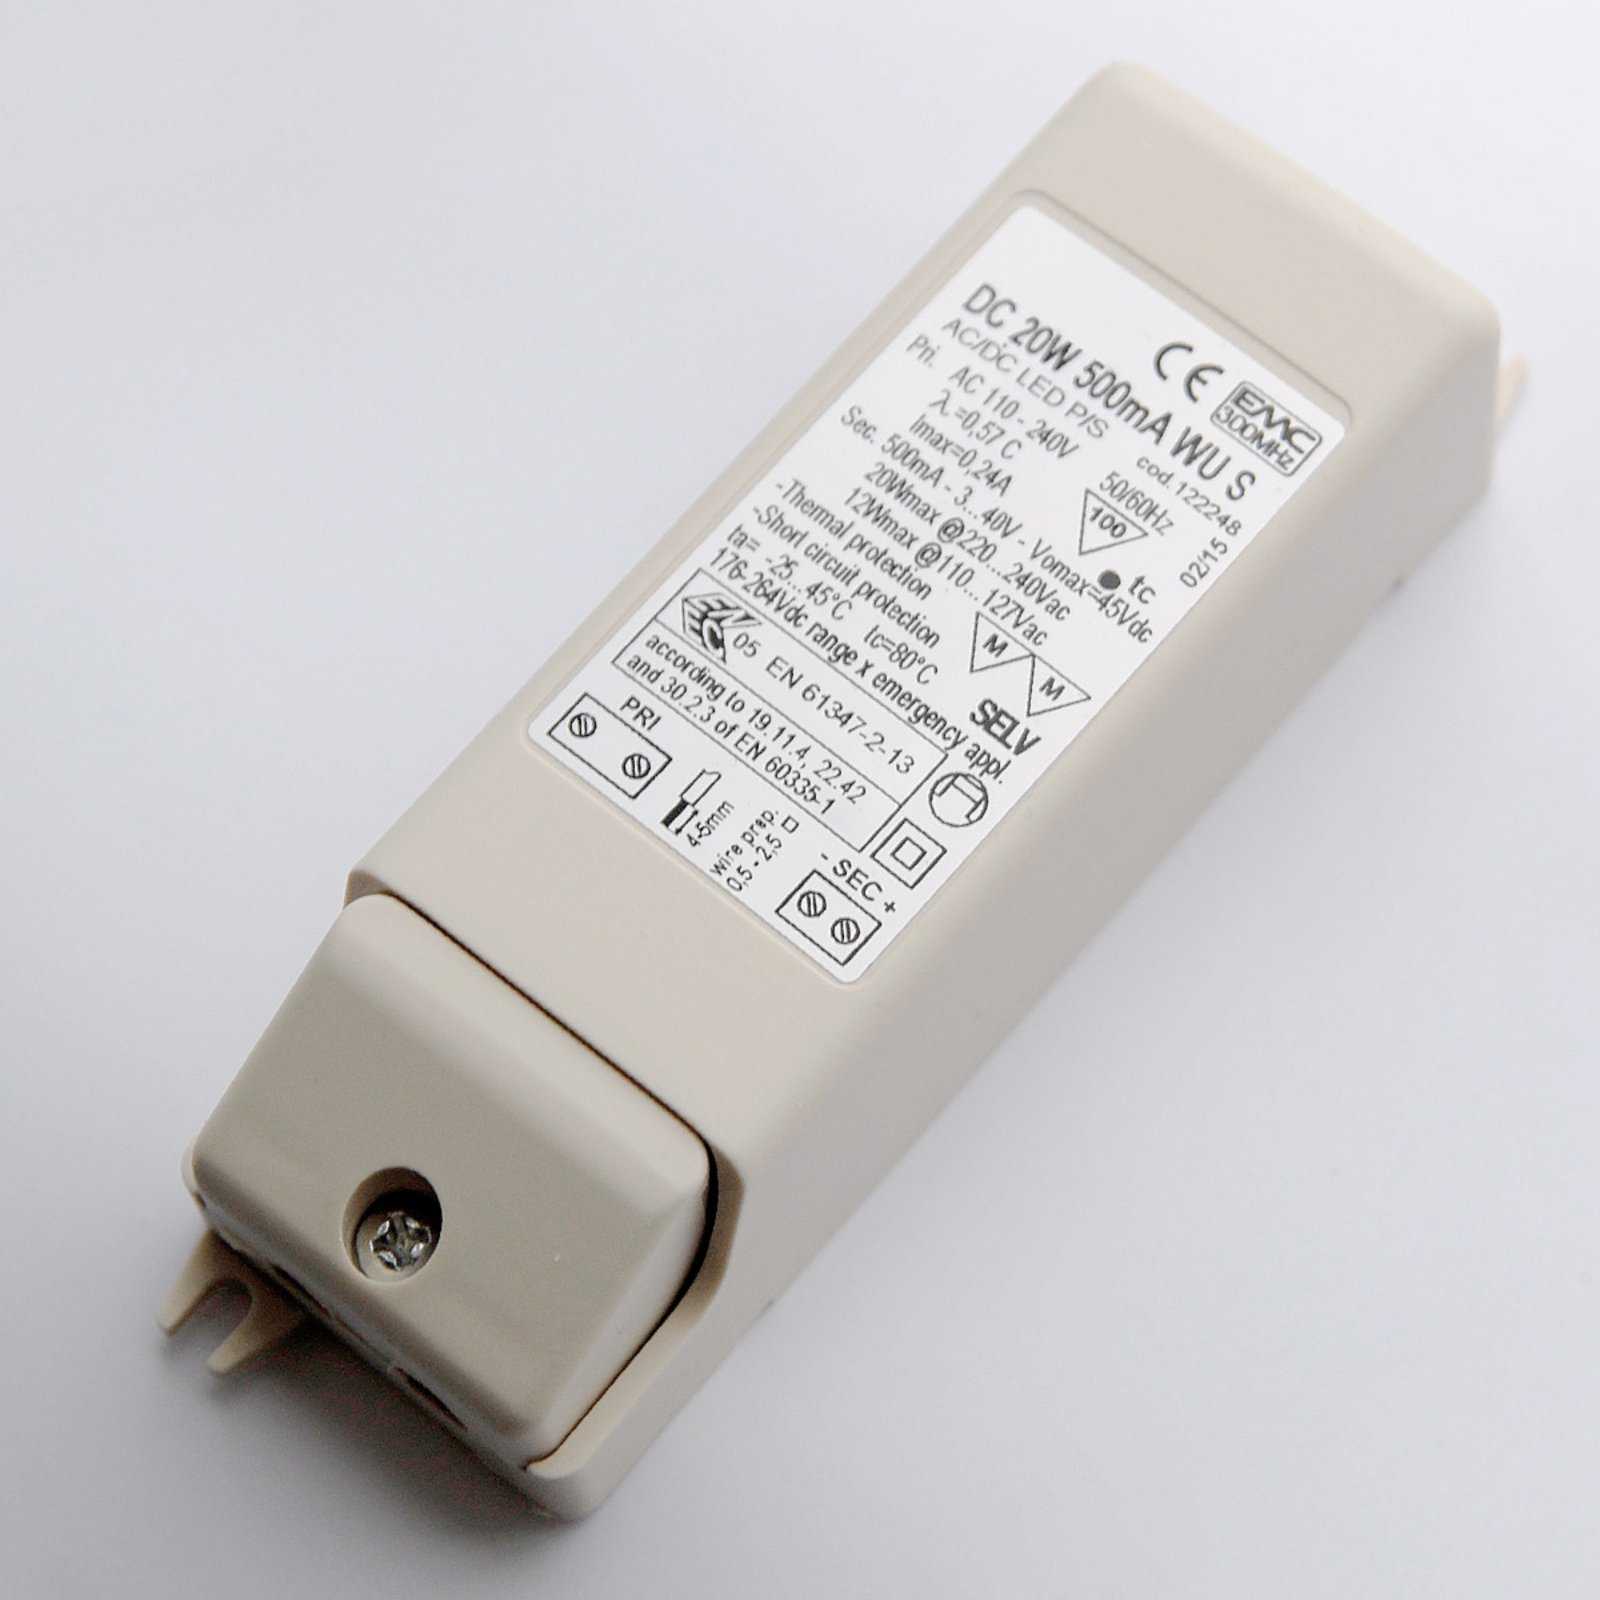 Driver for LED recessed light 2-20 W